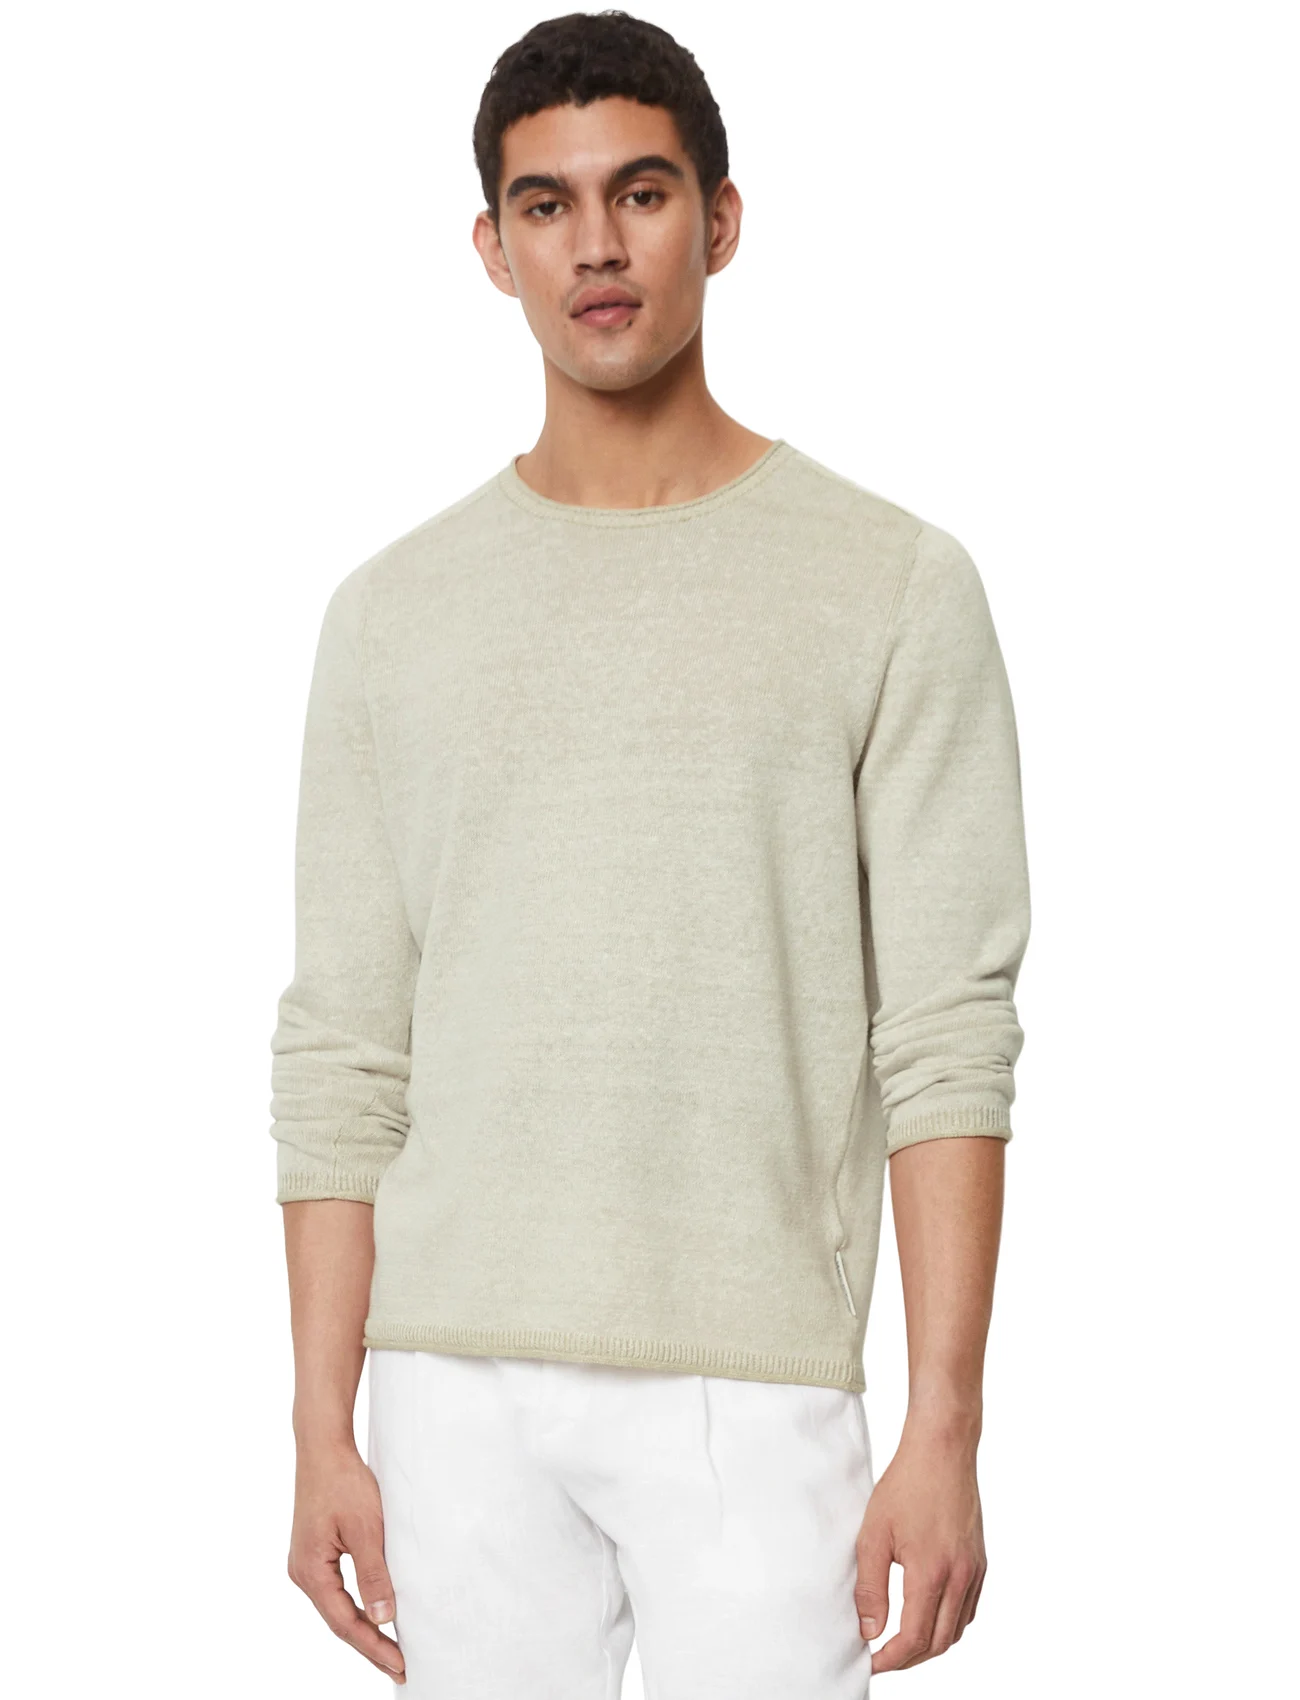 Marc O'Polo - PULLOVER LONG SLEEVE - strik med rund hals - white cotton - 1